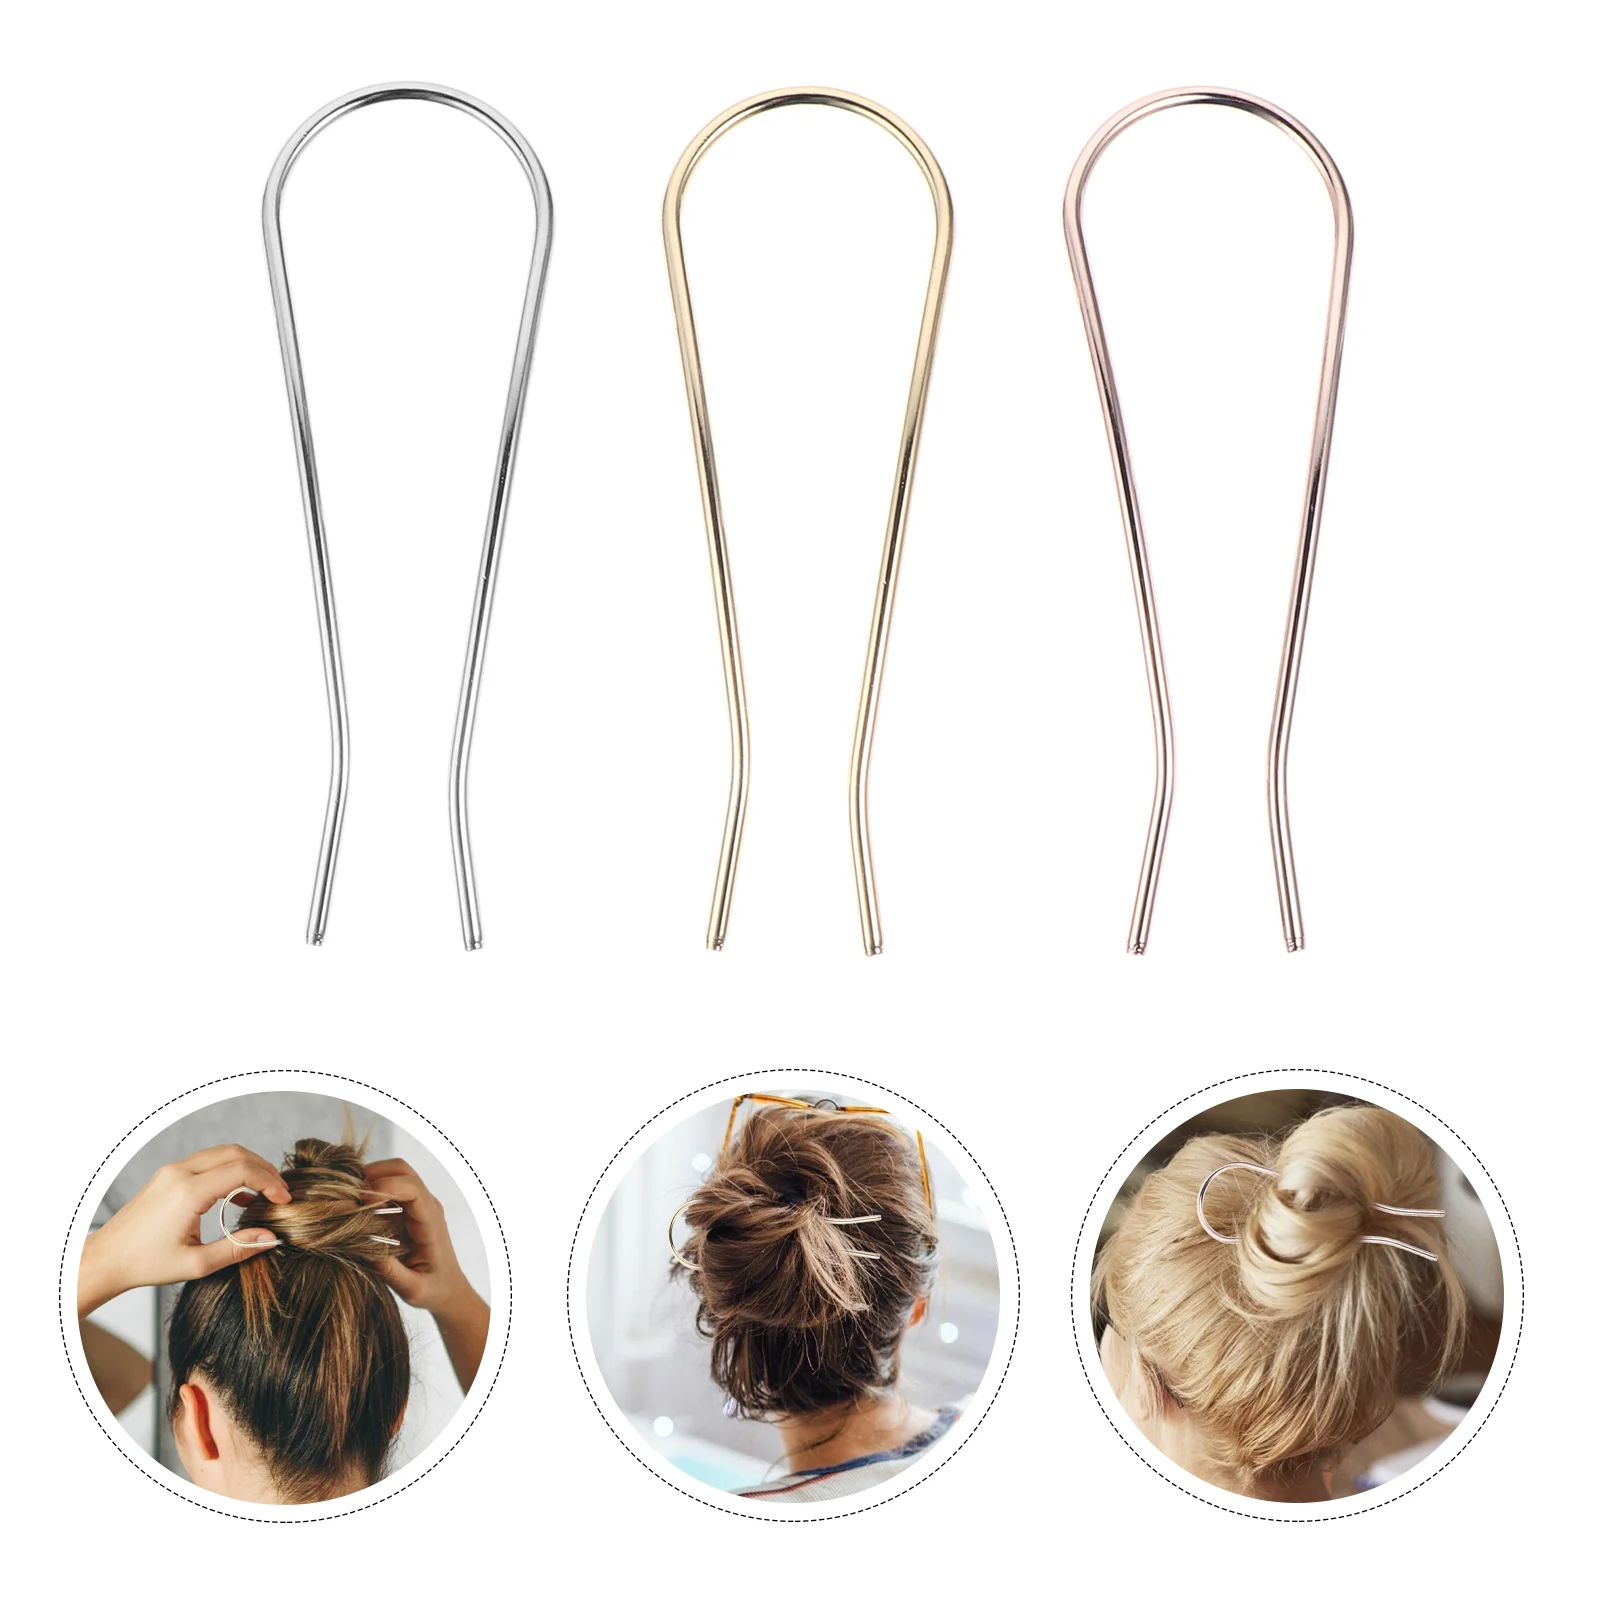 

Simple Retro Hairpin Women Headdress Hairpins Lady Barrettes U-shaped Headwears Clips Decors Vintage Forks Alloy Styling